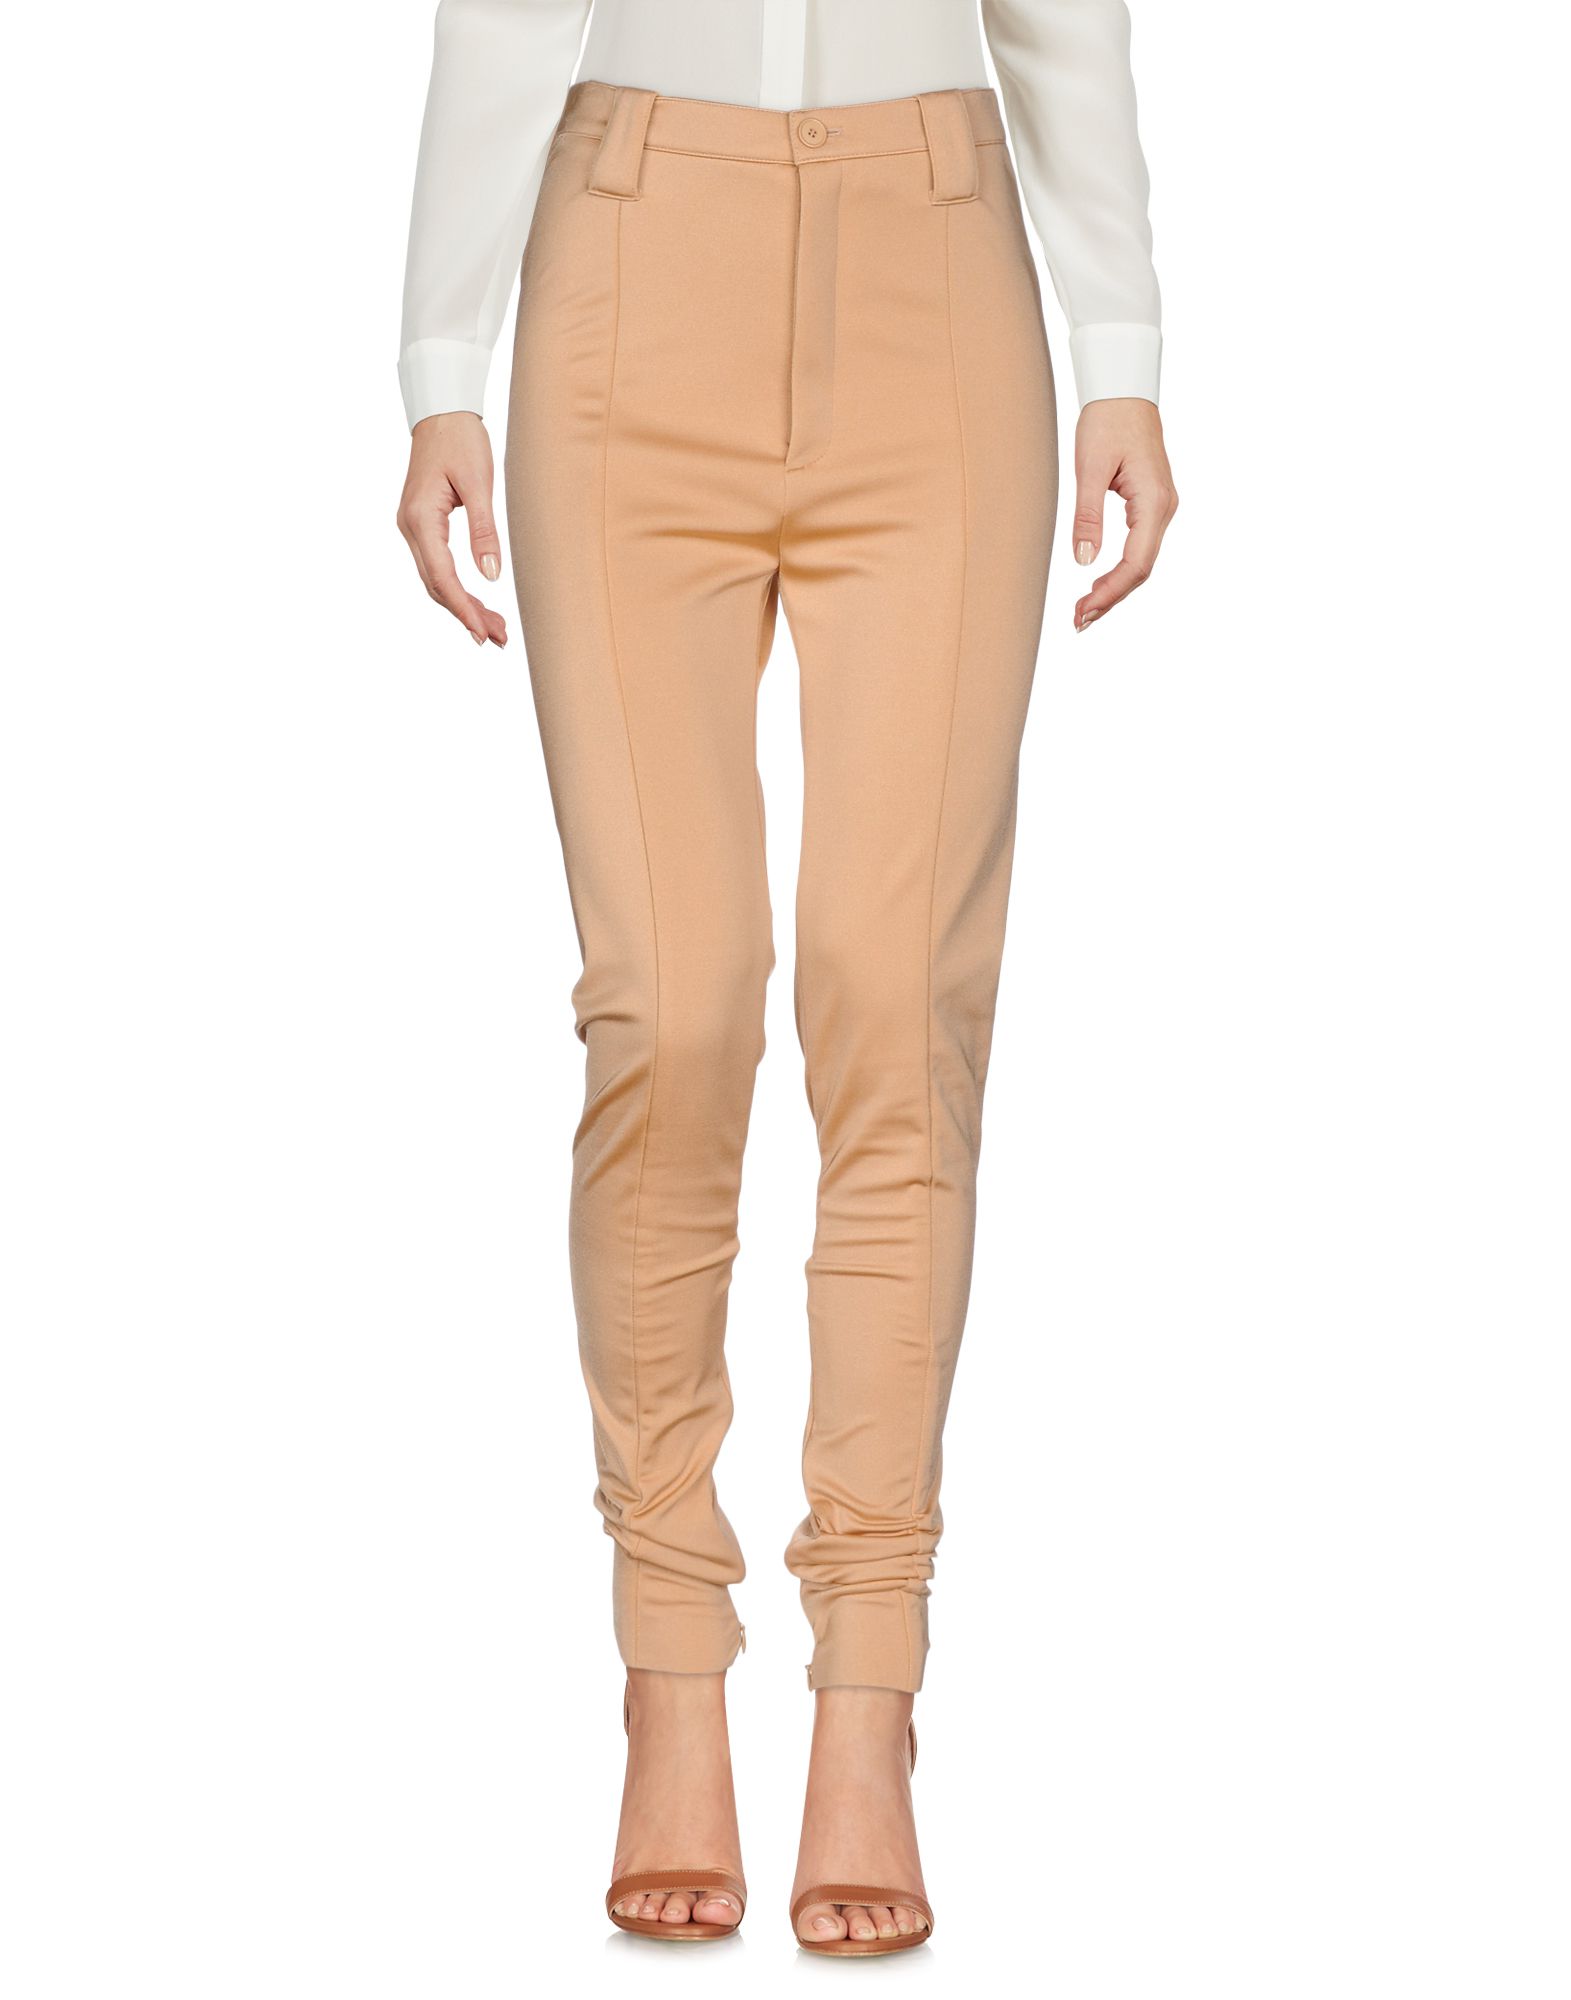 Cute Outfits With Joggers Flash Sales - benim.k12.tr 1691183858